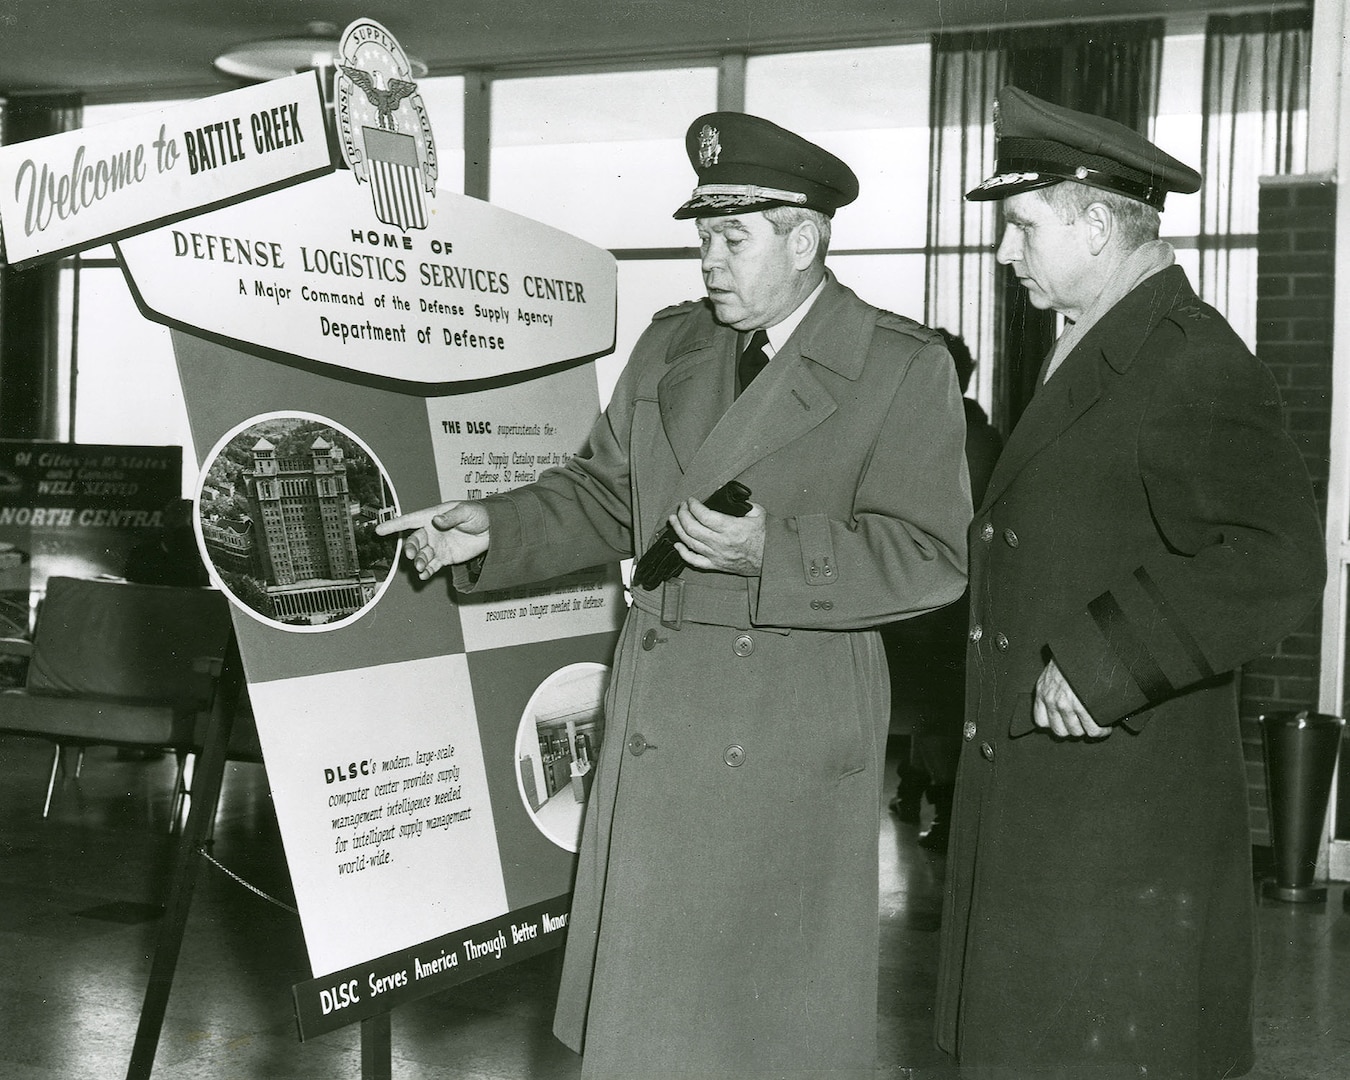 Defense Supply Agency Director Army Lt. Gen. Andrew McNamara visits the DSA offices in Battle Creek, Michigan, for the dedication of the Defense Logistics Services Center in February 1963.